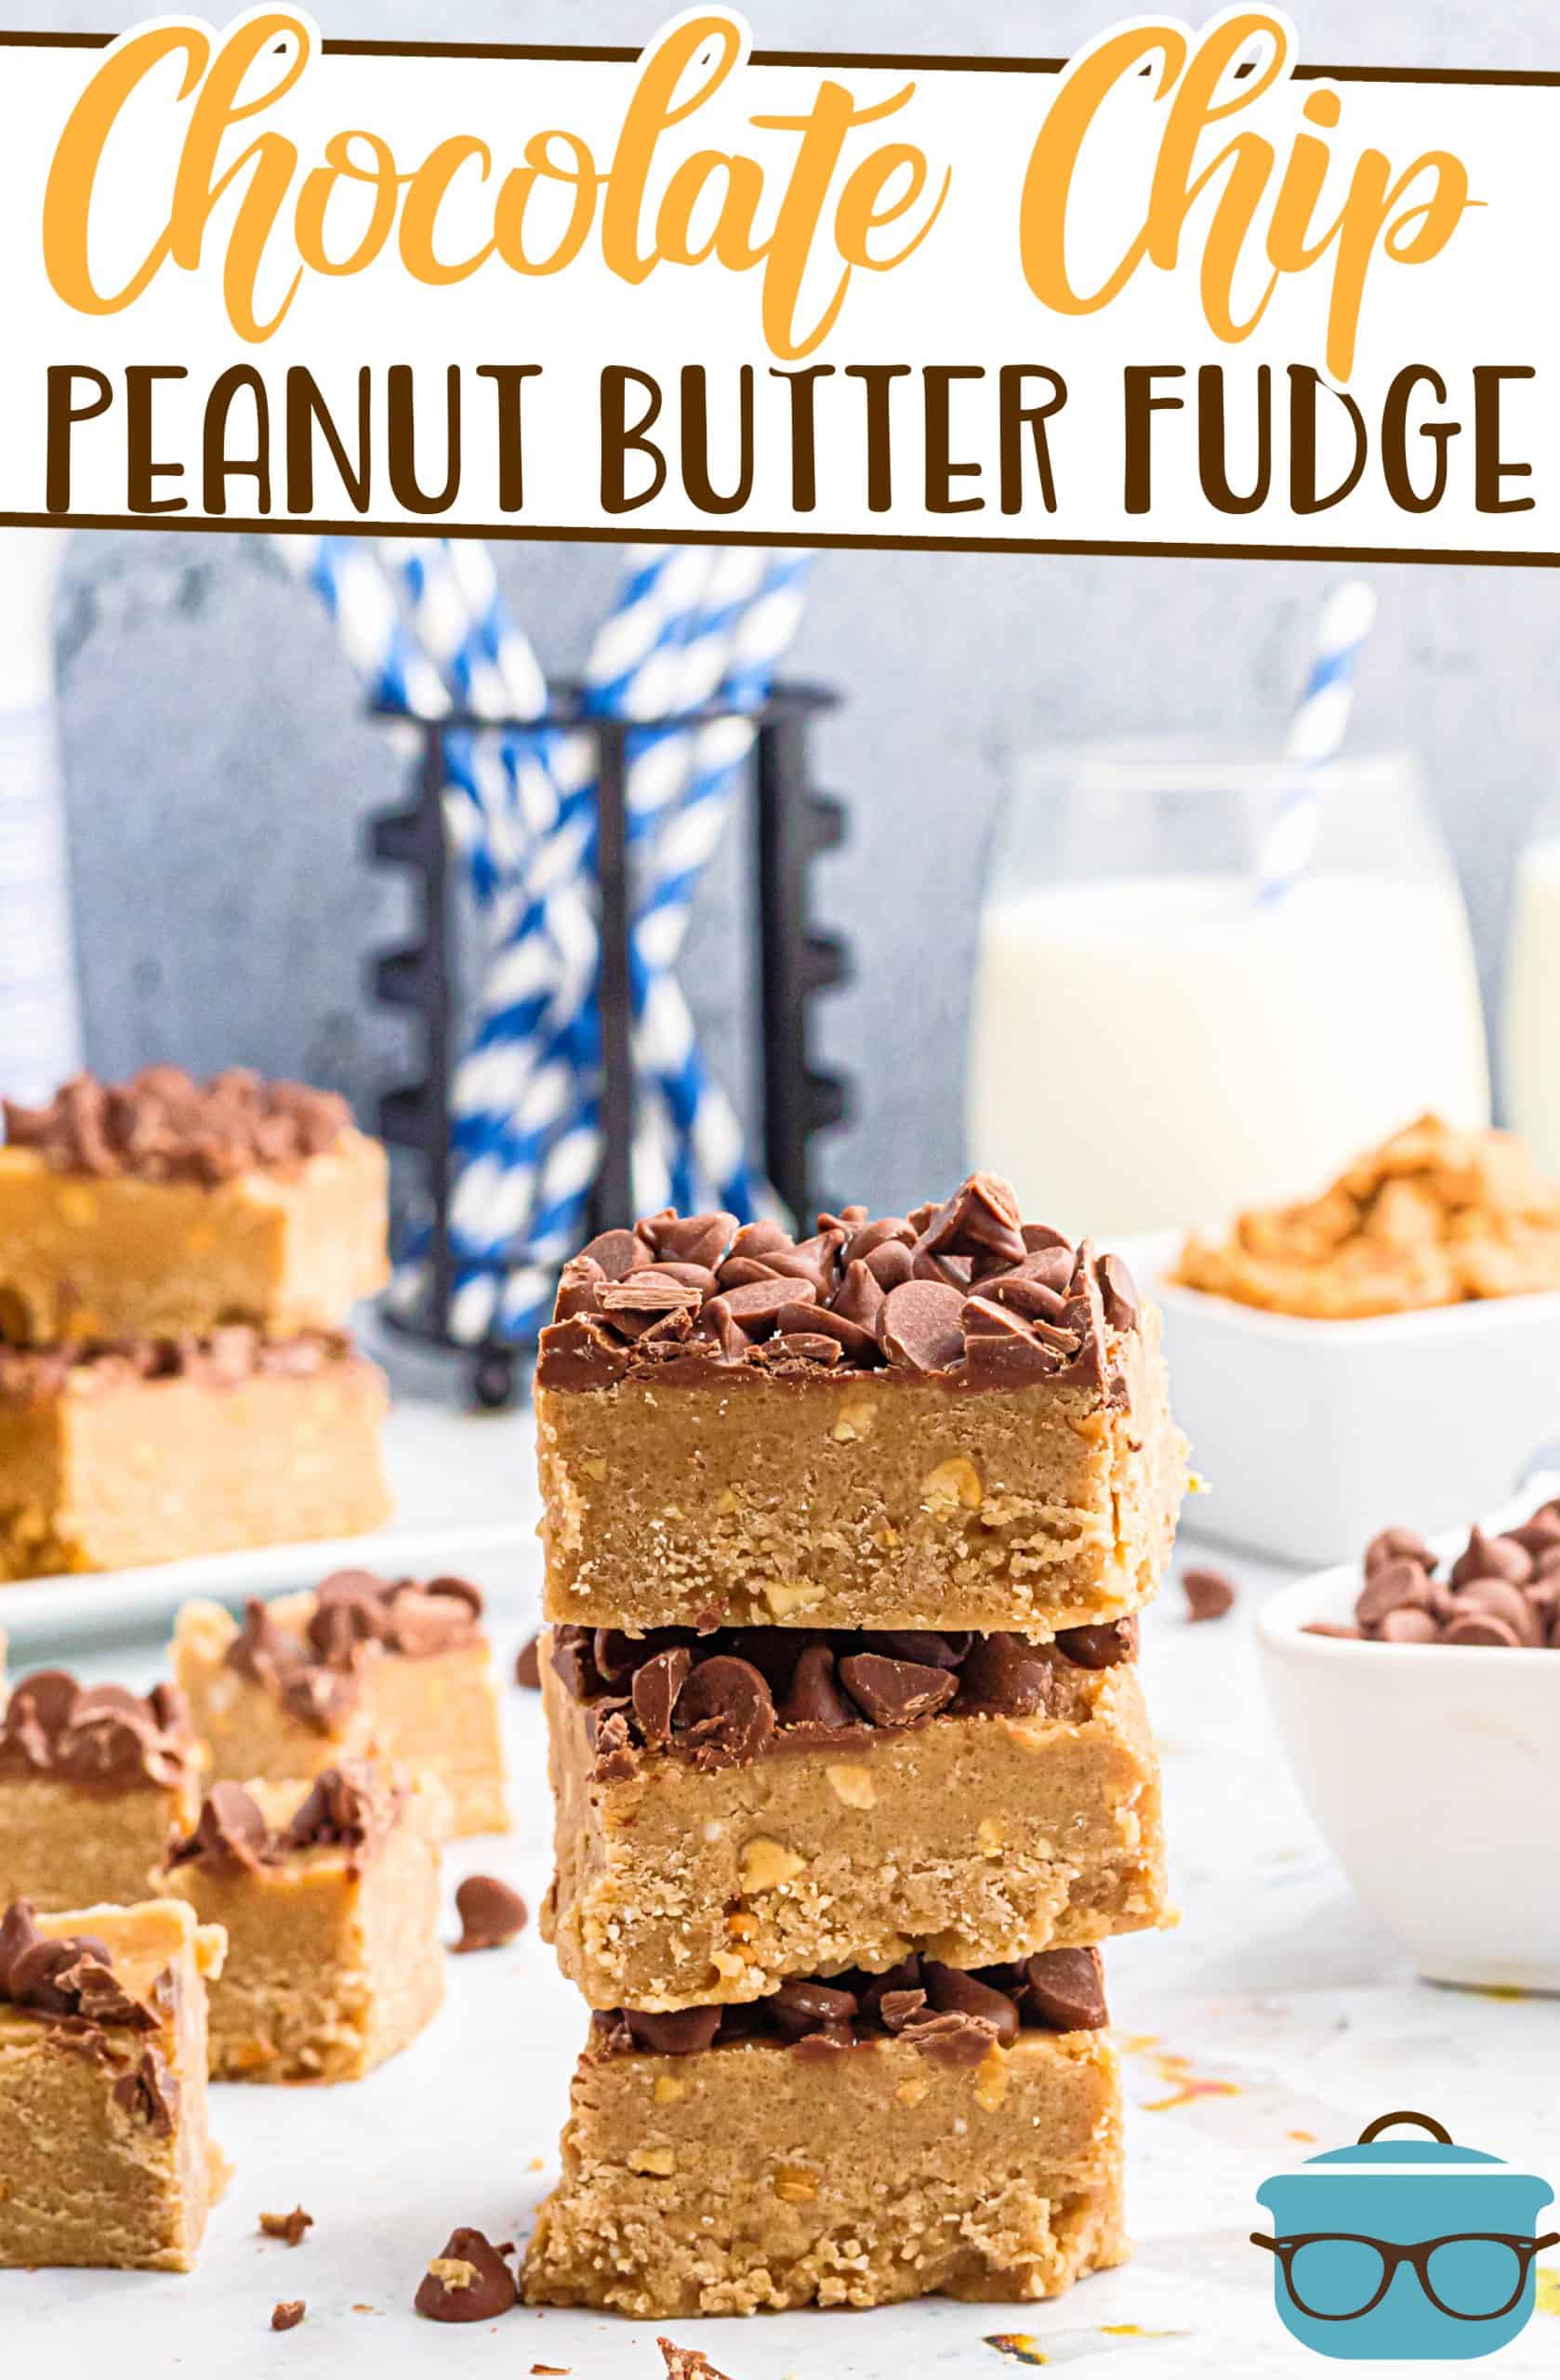 Chocolate Chip Peanut Butter Fudge recipe from The Country Cook, three fudge pieces shown stacked on top of each other with glasses of milk in the background.